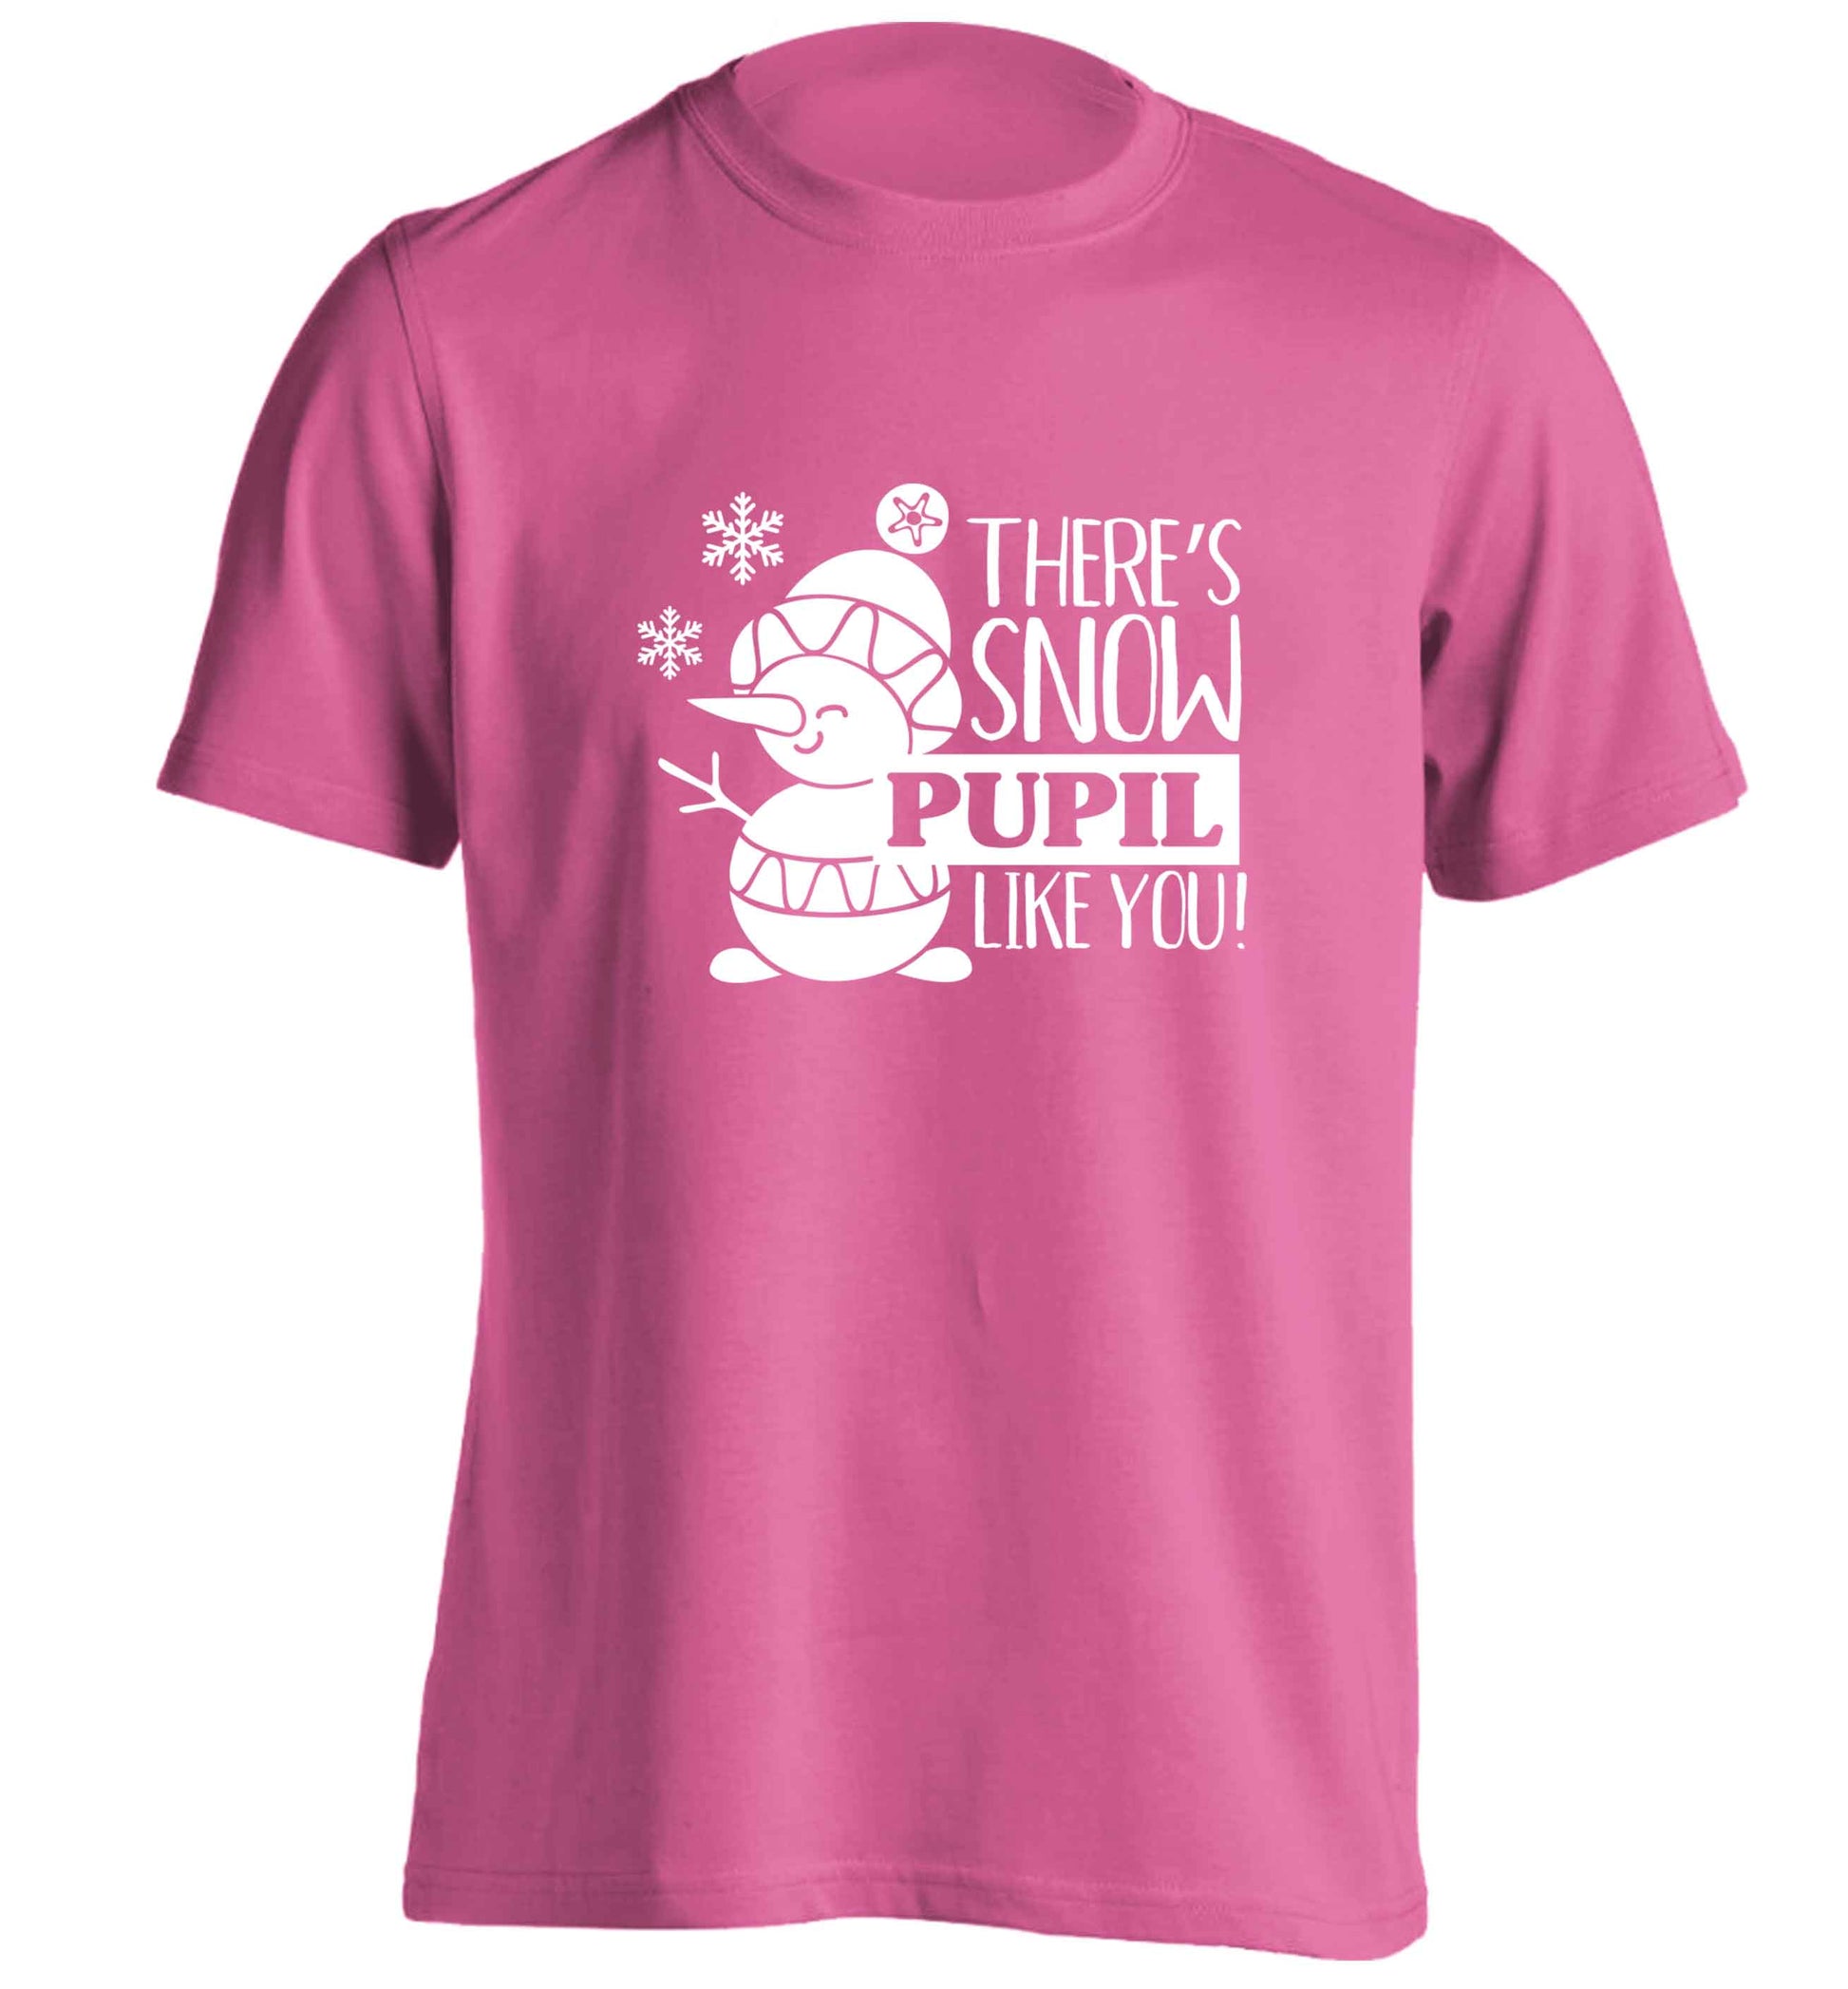 There's snow pupil like you adults unisex pink Tshirt 2XL